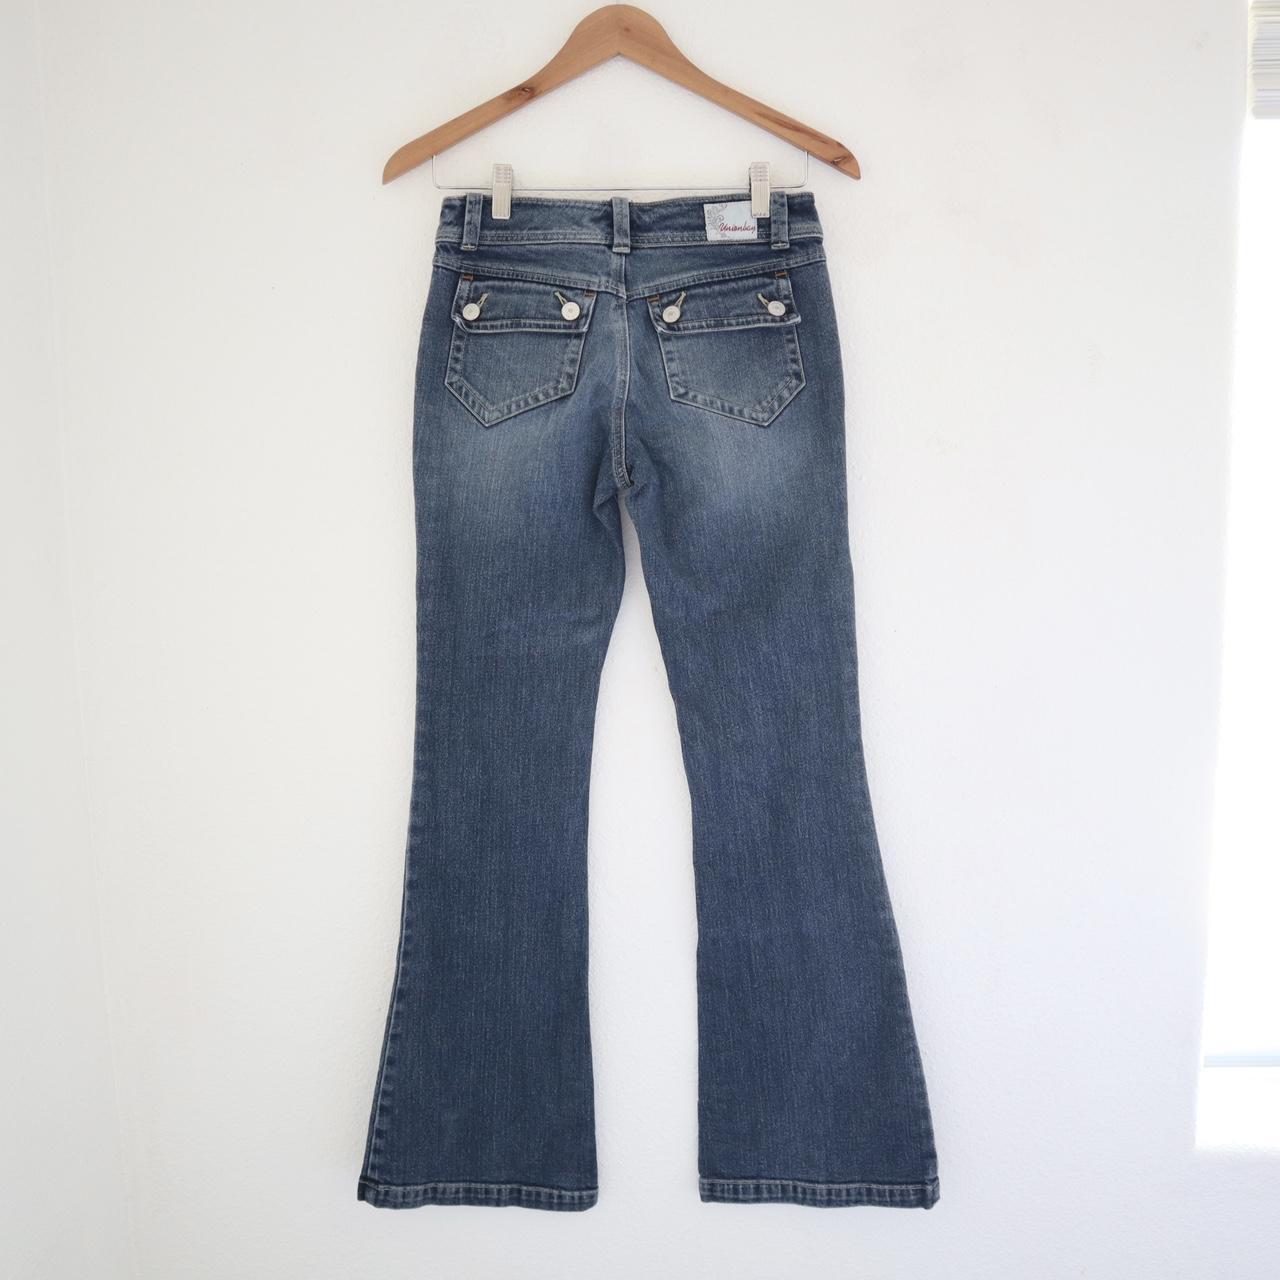 Y2K low rise dark wash flare jeans from Union Bay.... - Depop